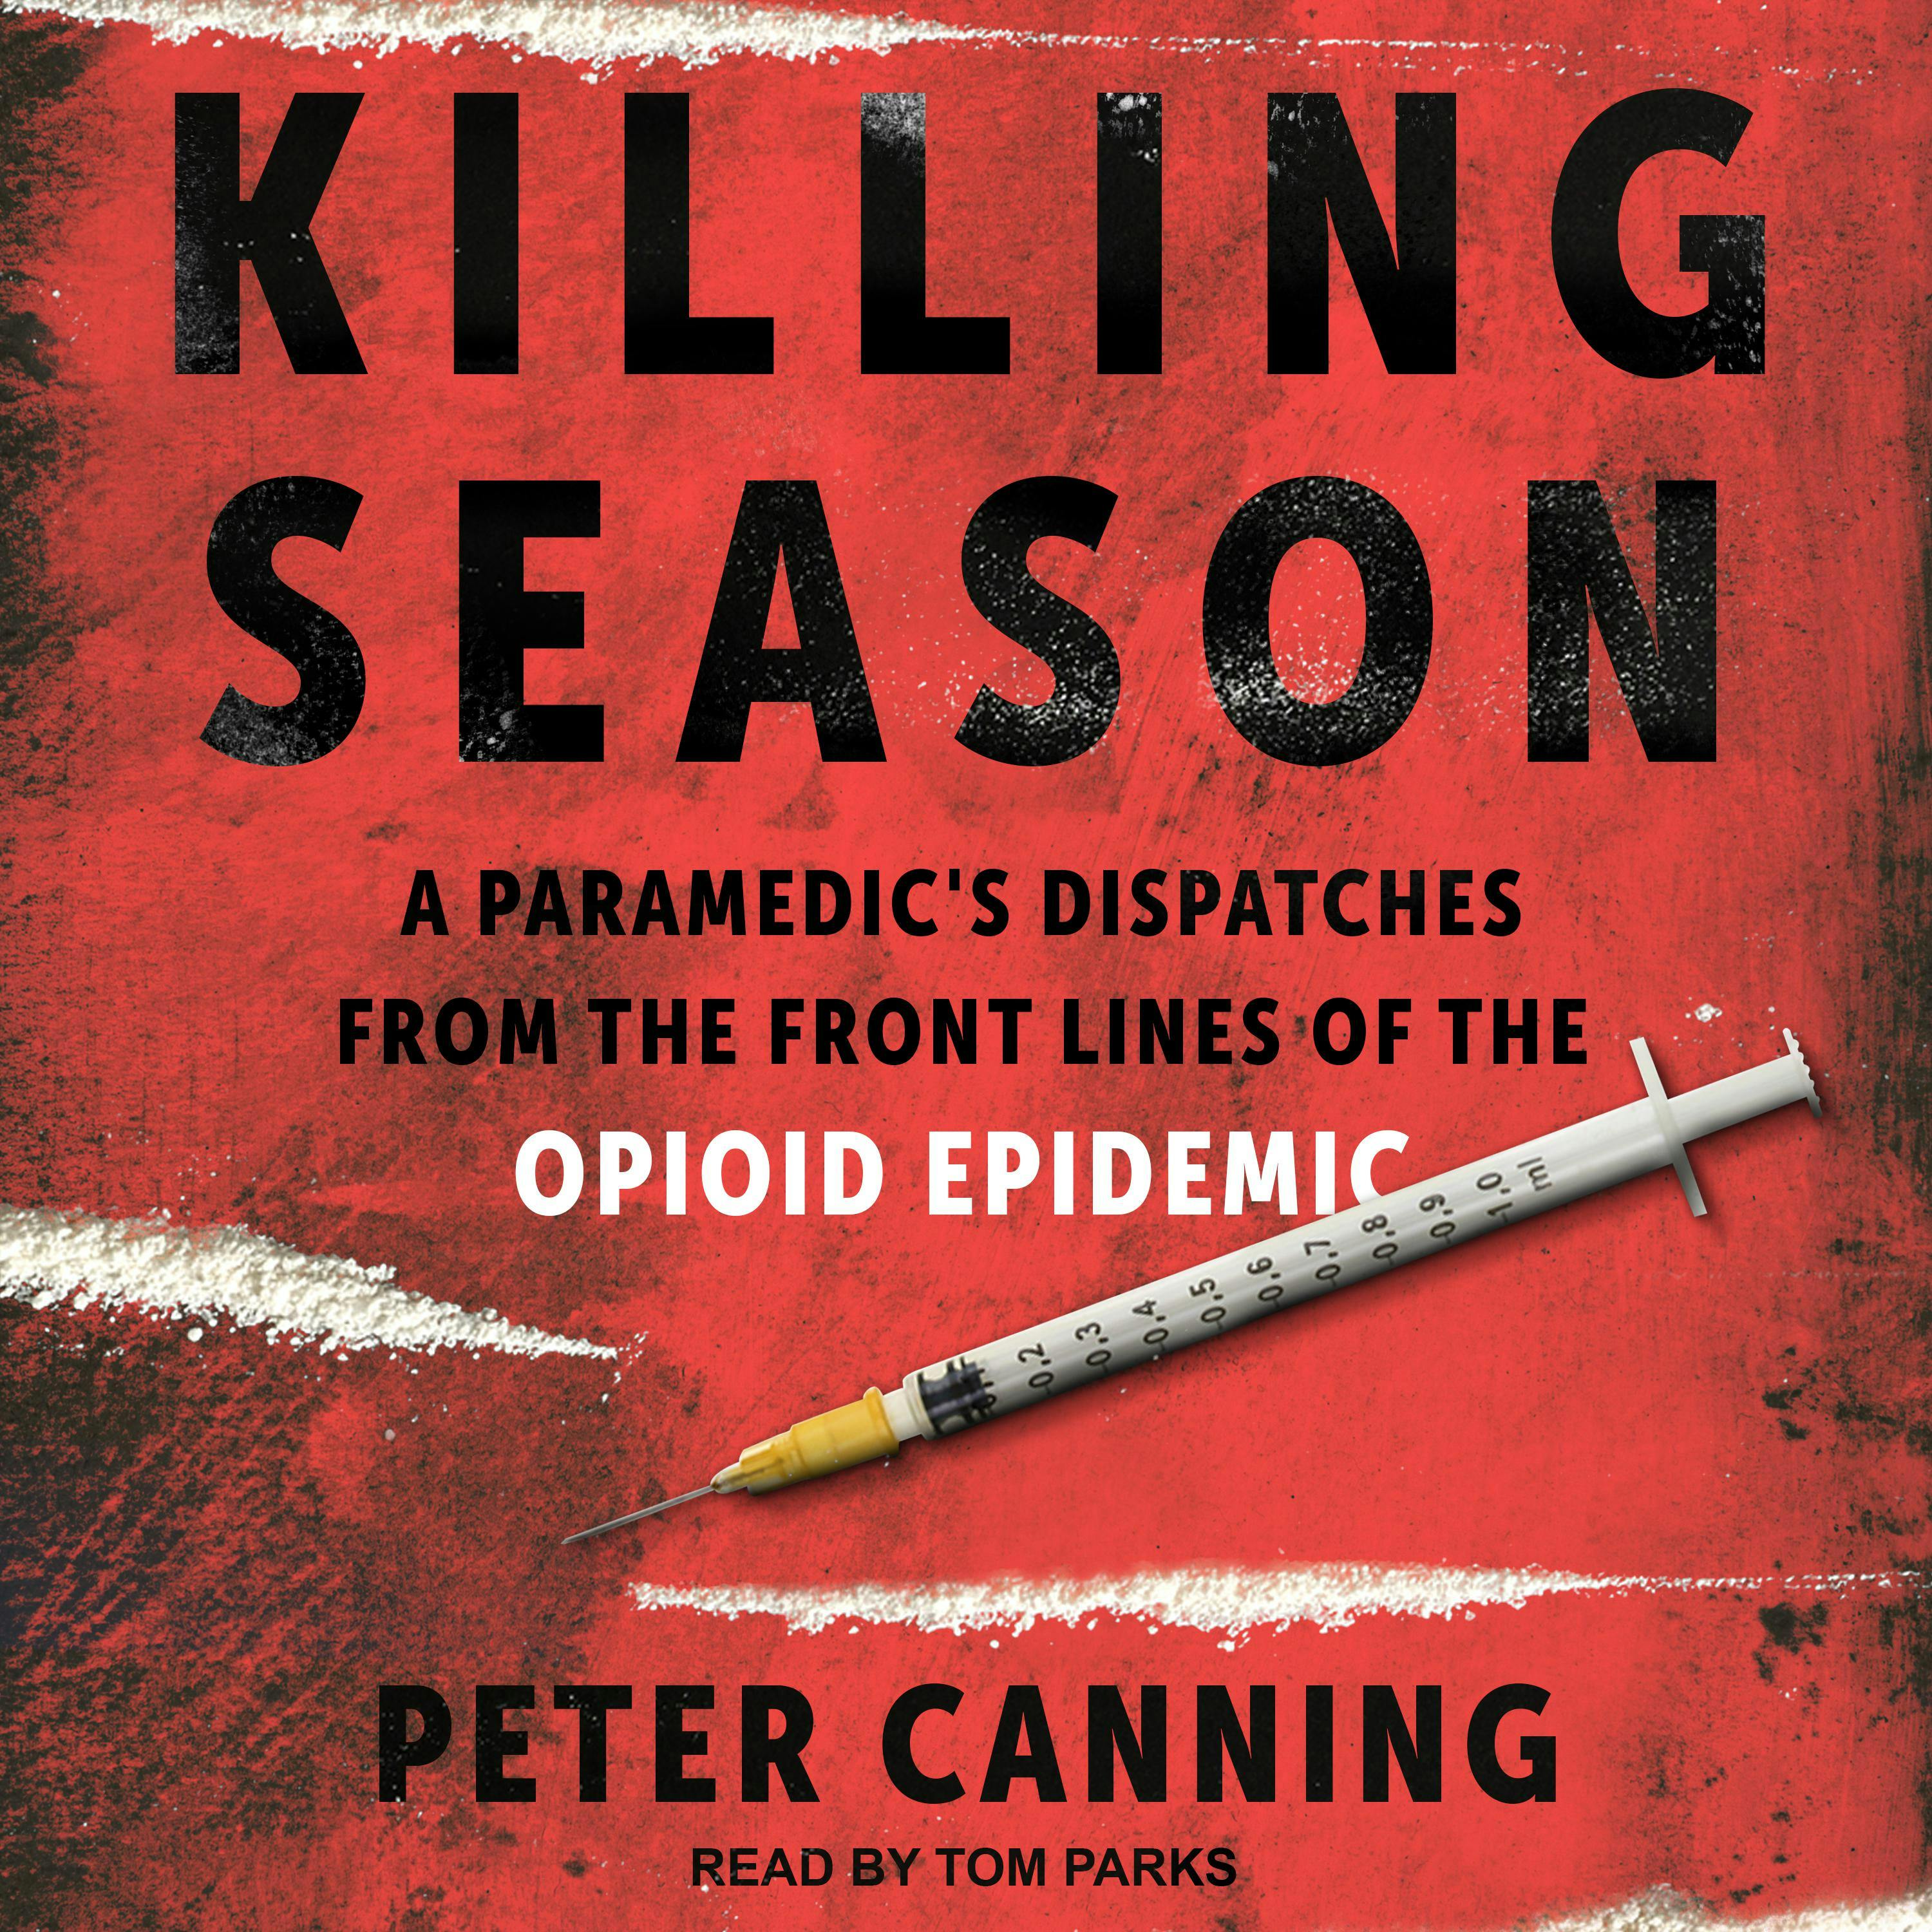 Killing Season: A Paramedic's Dispatches from the Front Lines of the Opioid Epidemic - Peter Canning